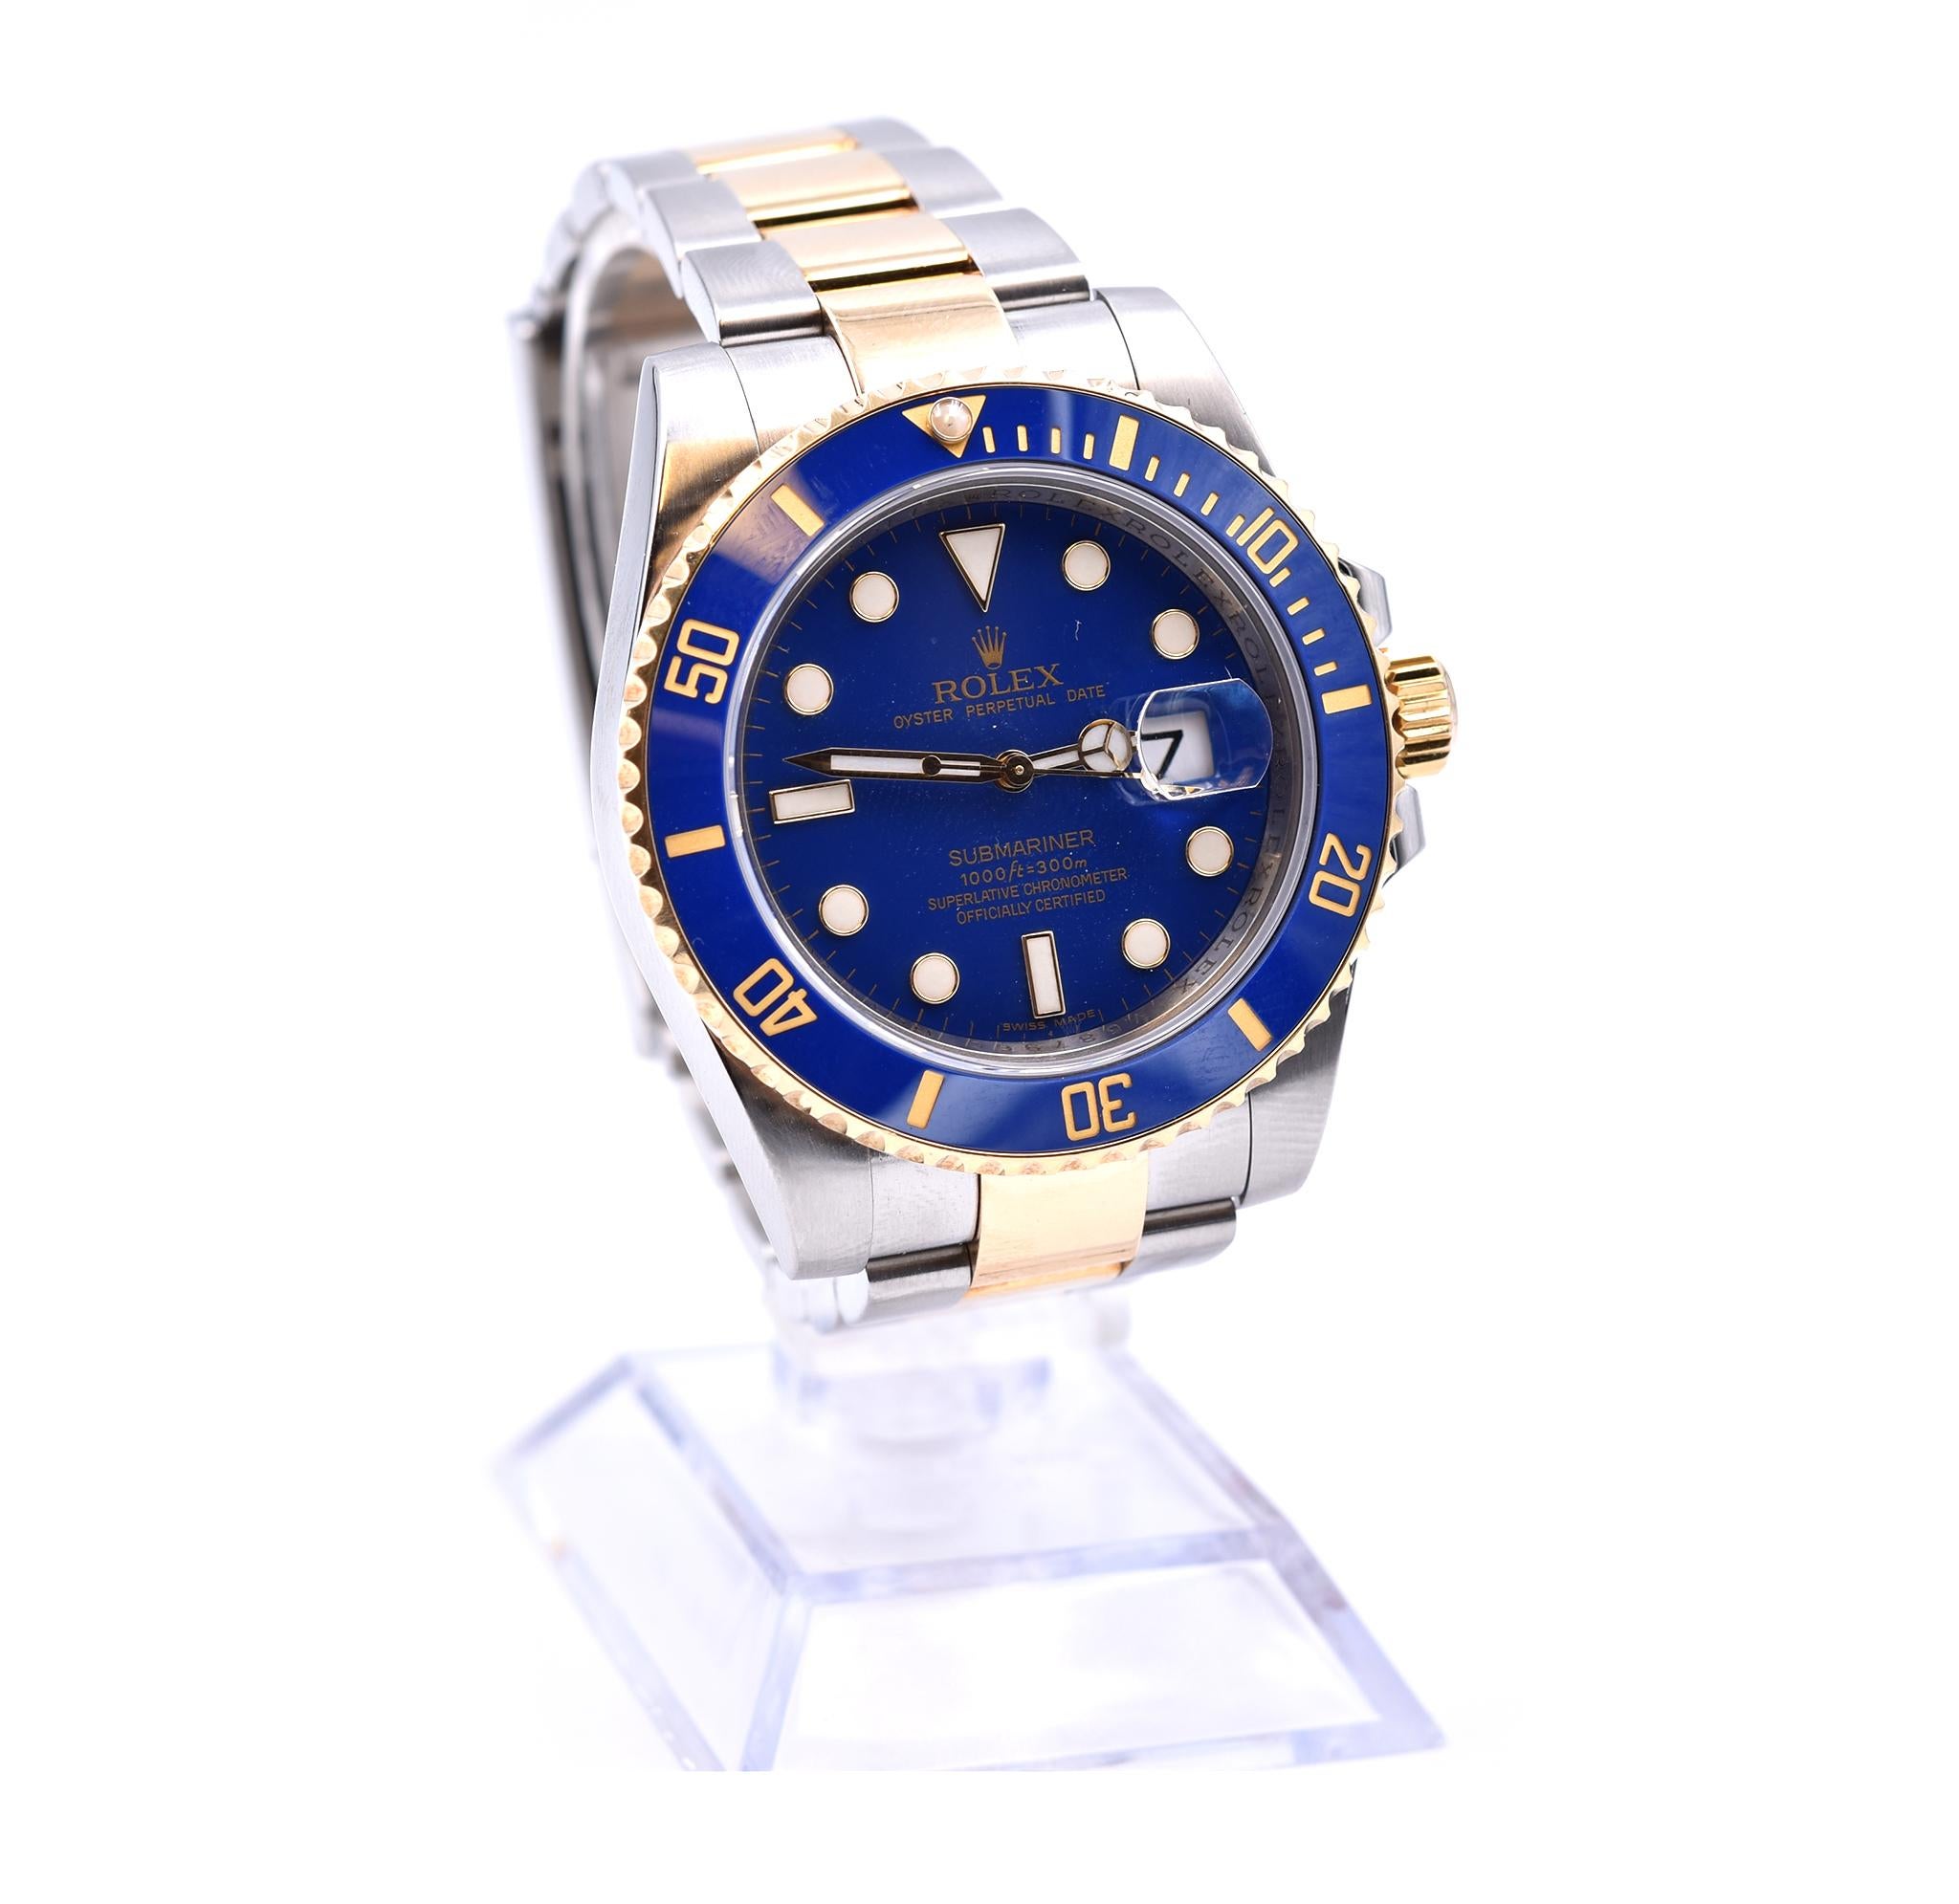 Movement: automatic
Function: hours, minutes, seconds, date
Case: round 40mm stainless steel case with blue ceramic 18k yellow gold diving bezel, sapphire protective crystal, screw-down crown, water resistant to 300 meters
Band: stainless steel and